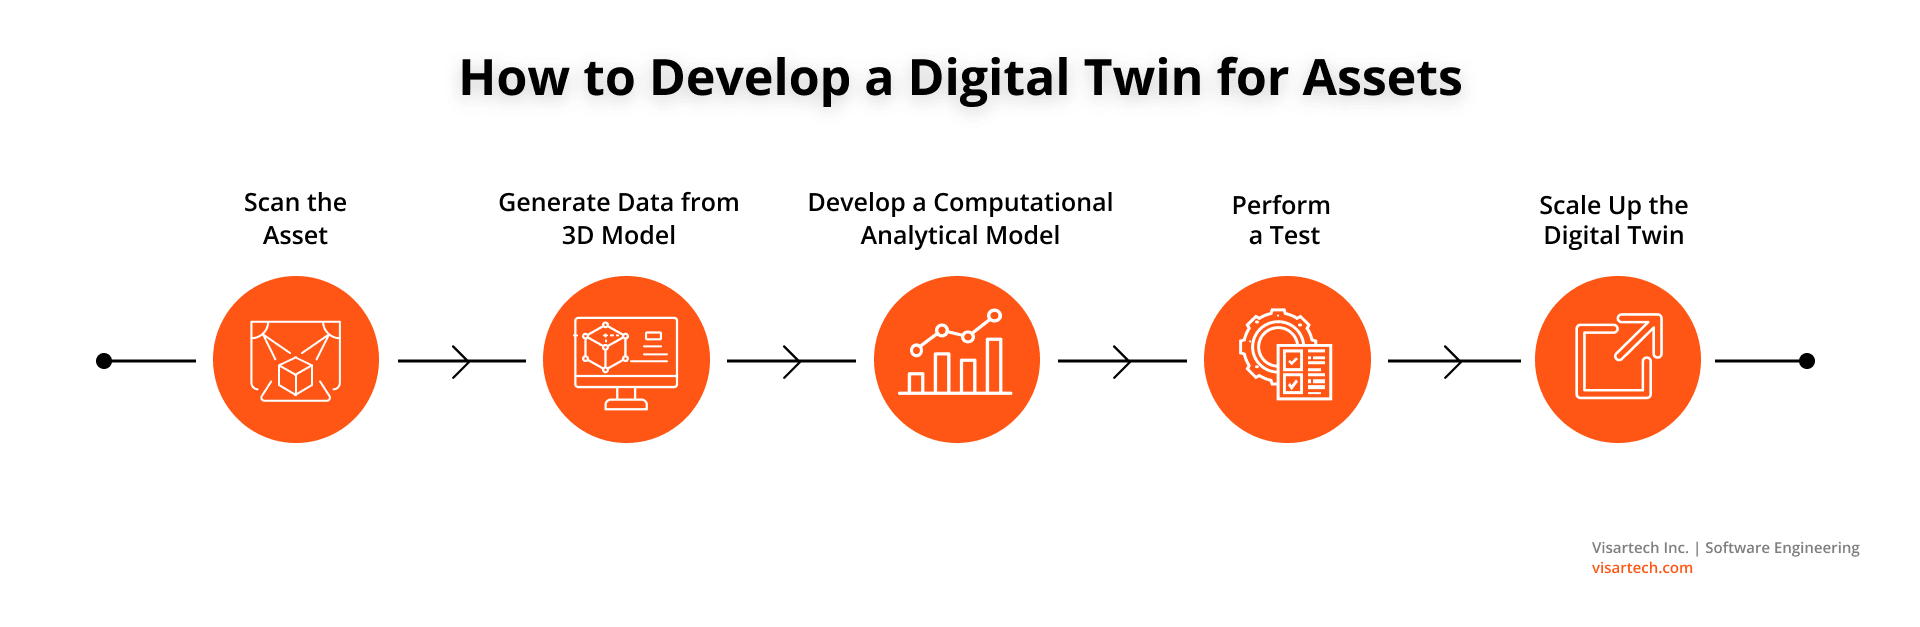 How to Develop a Digital Twin for Assets - Visartech Blog